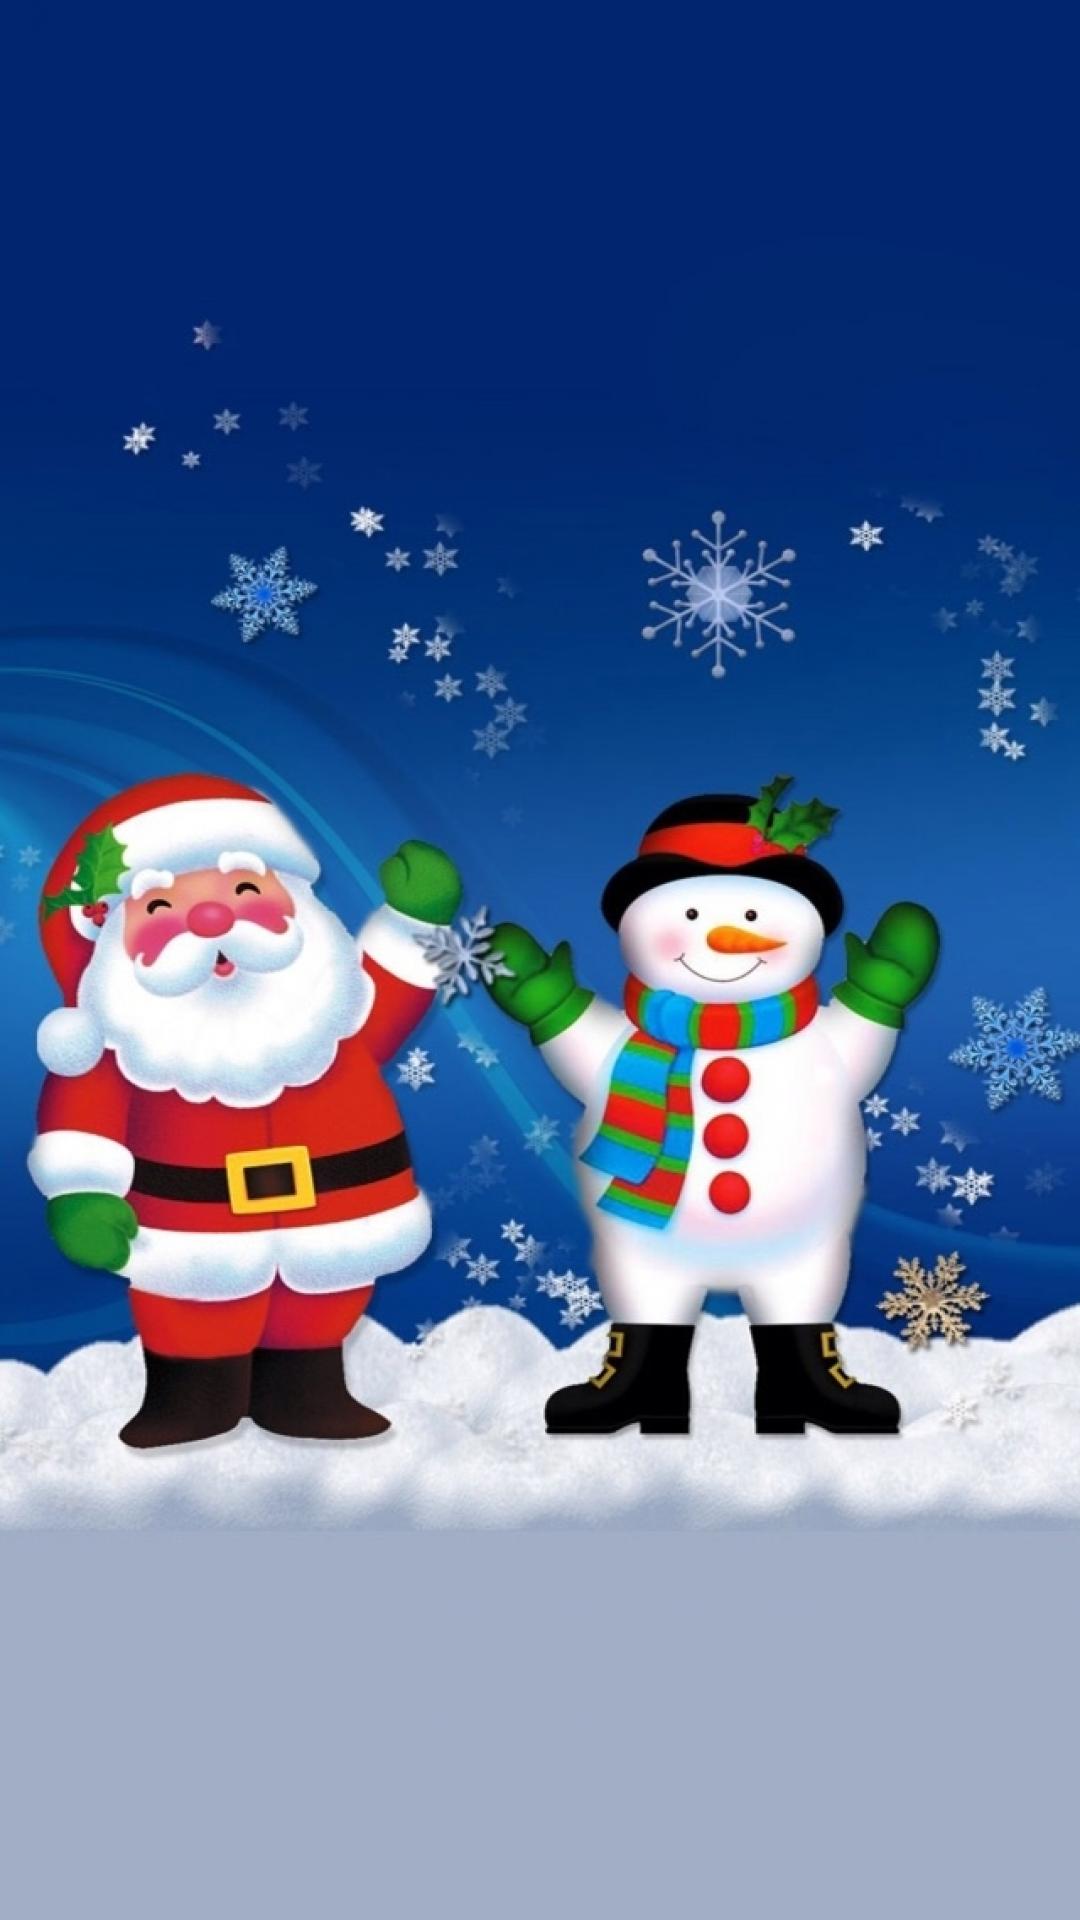 Merry Christmas Santa Claus And Snowman iPhone Wallpaper